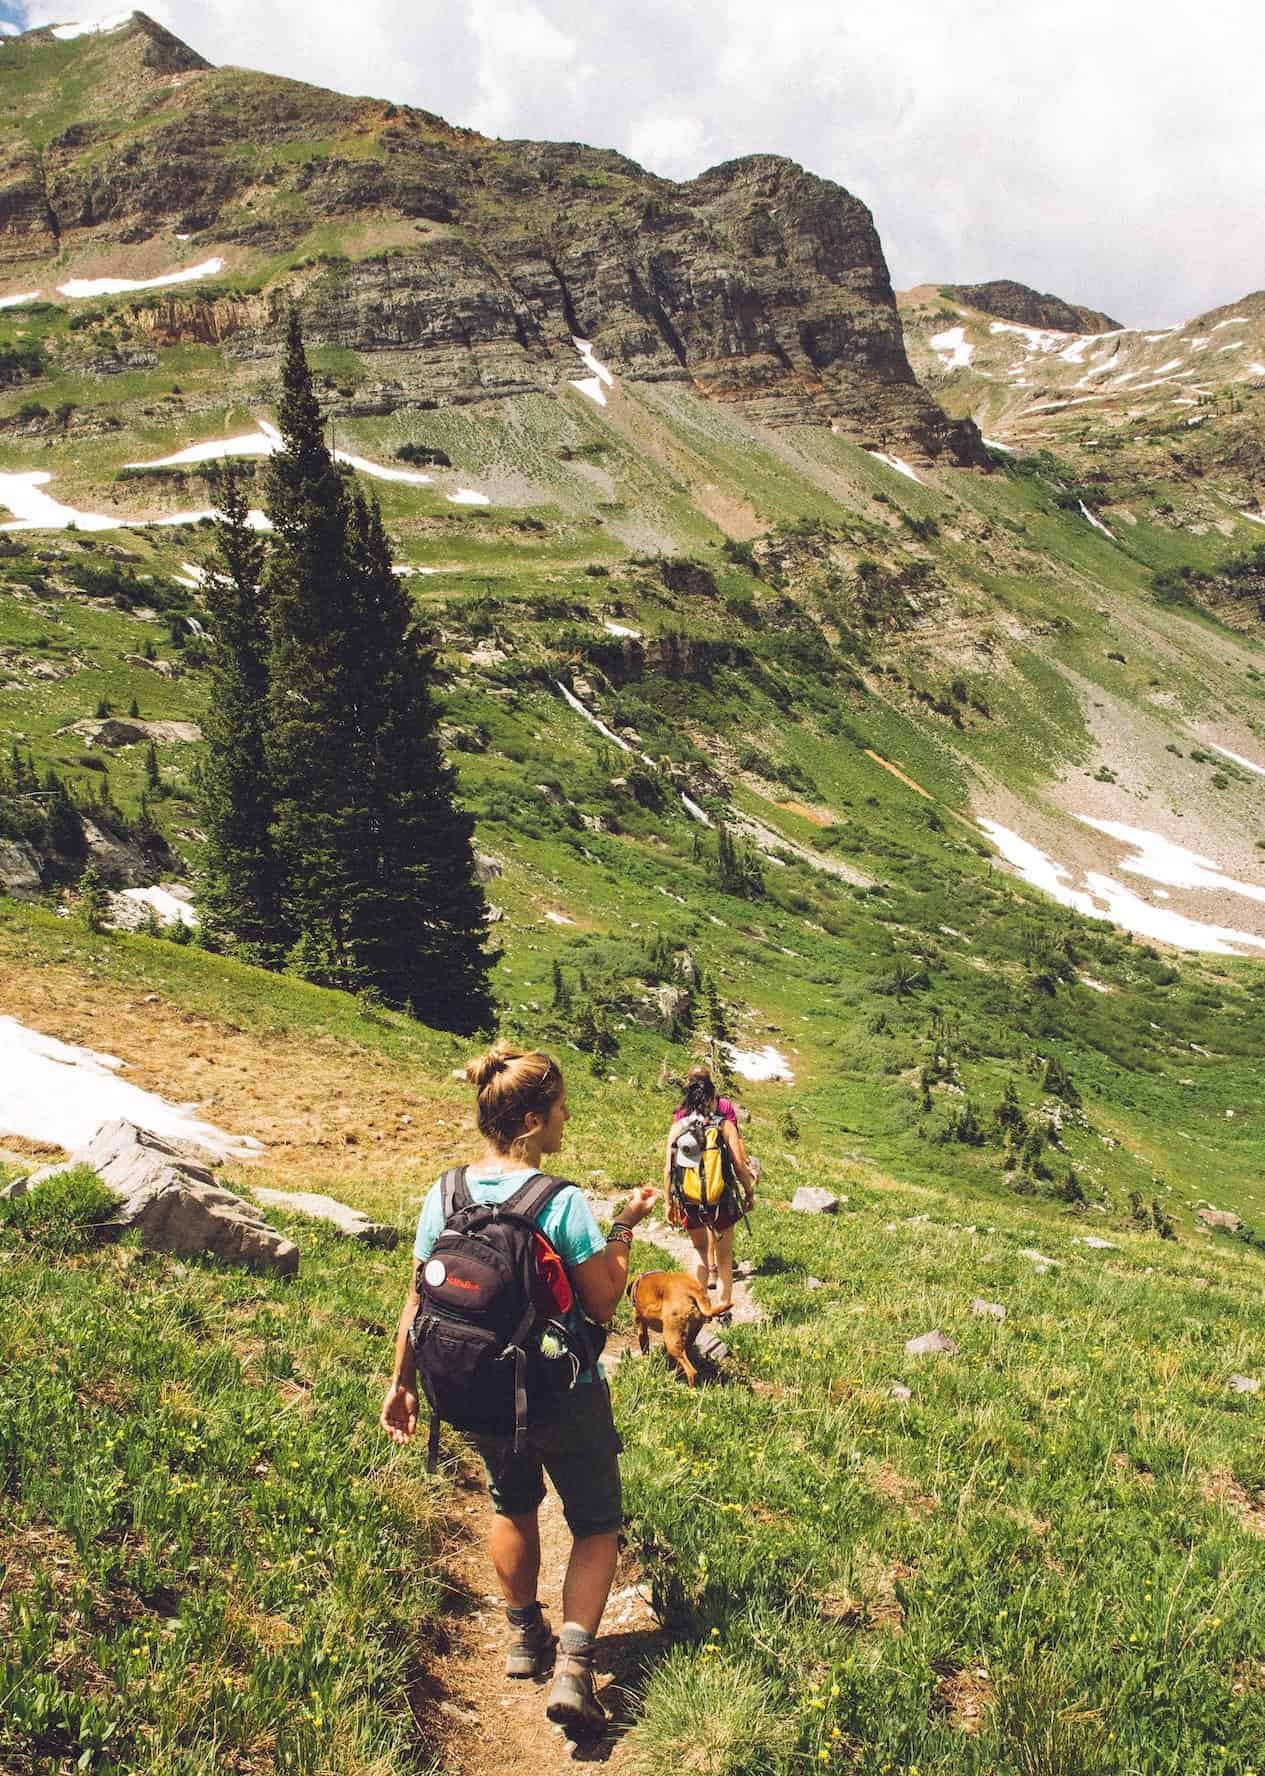 image of two women hiking down a hill path in a green mountain landscape